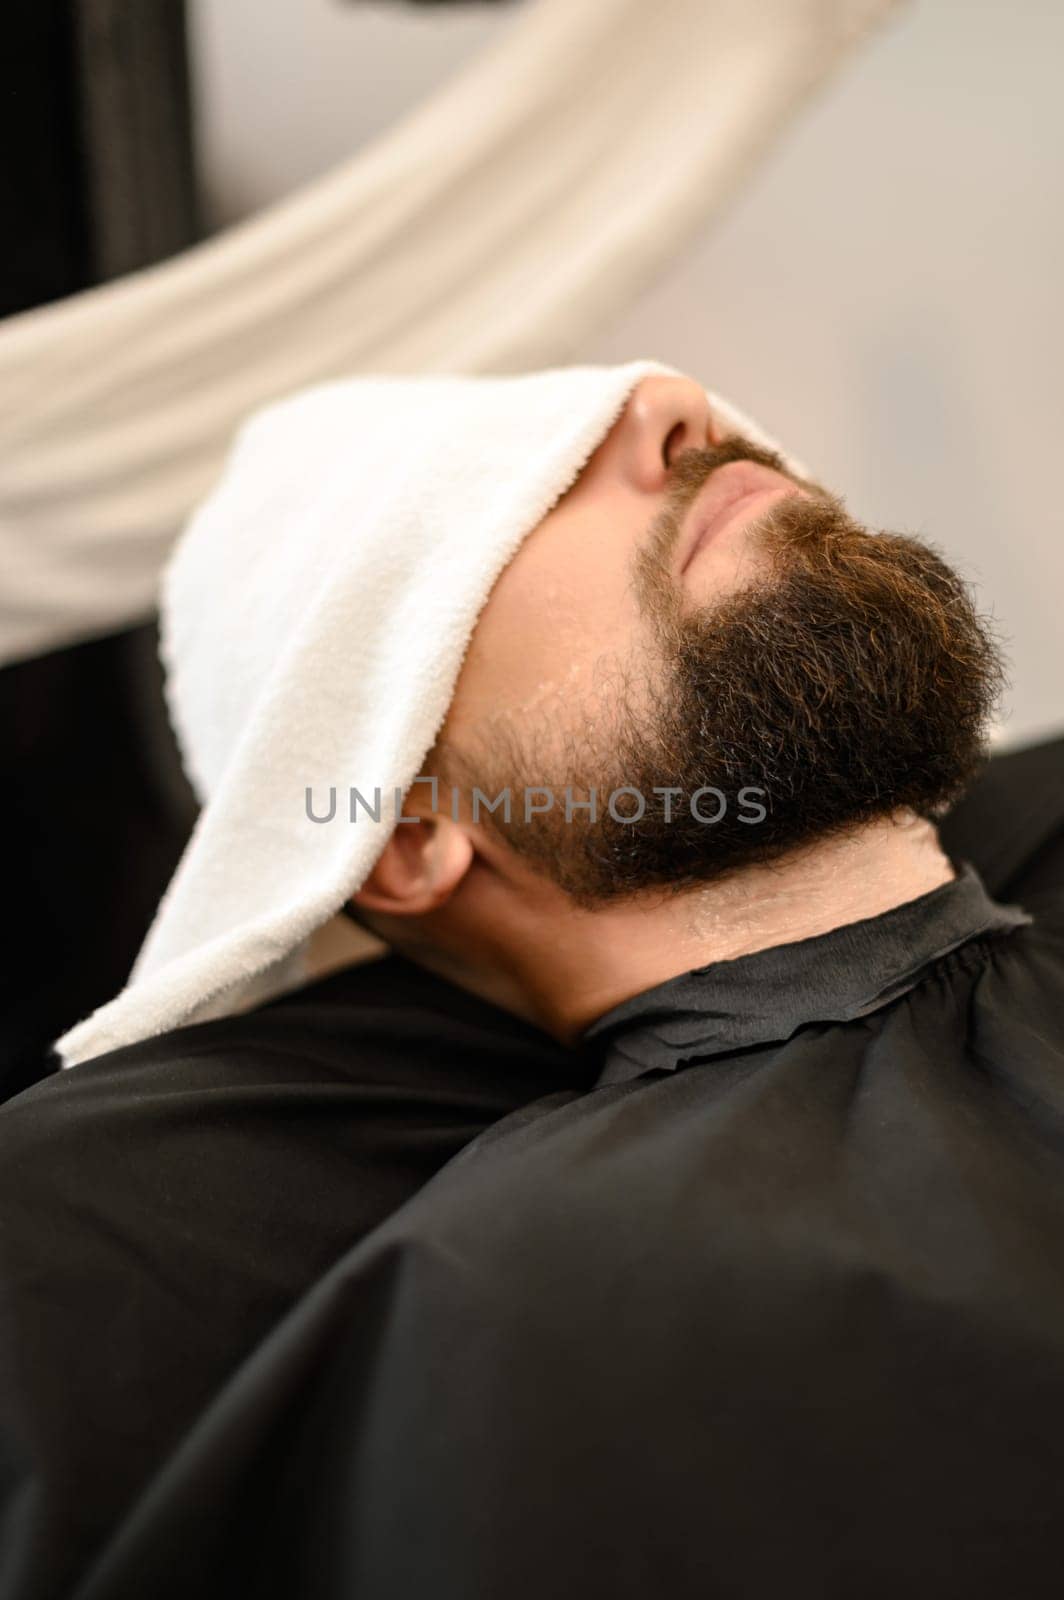 A client is lying on a chair in a barbershop with his beard wrapped in a towel. A towel covers the mans eyes.